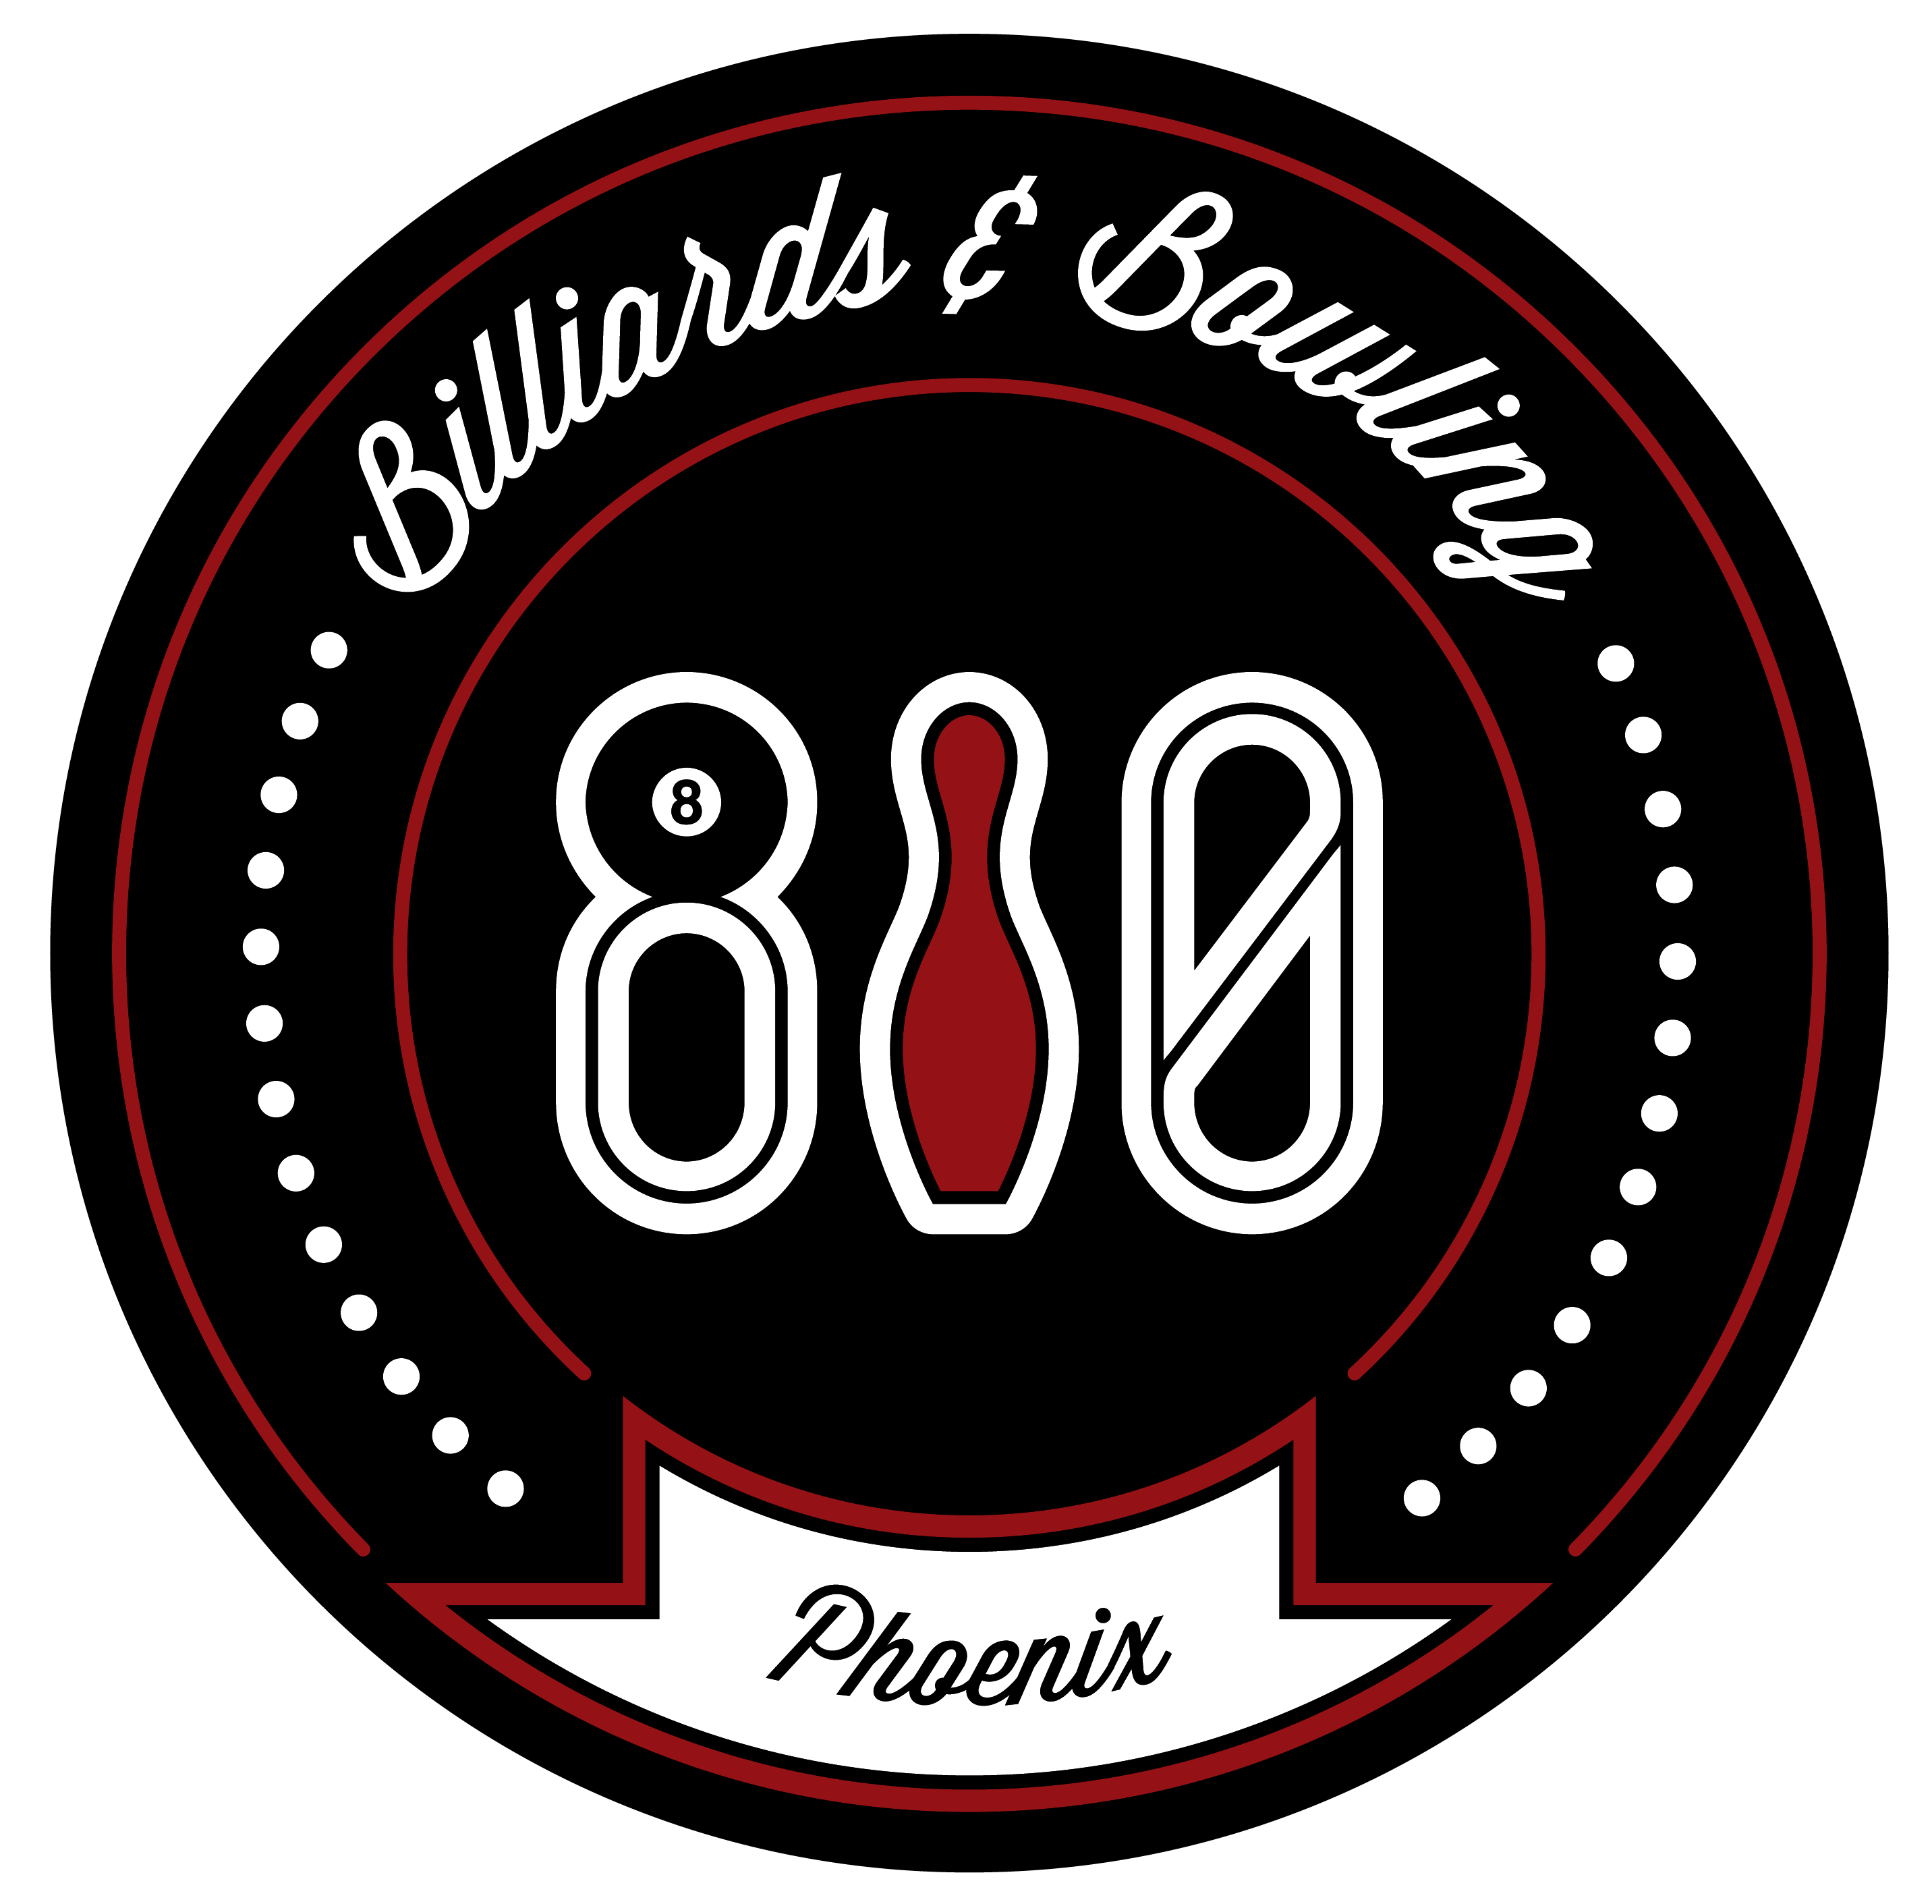 — Darrell, General Manager, 810 Billiards & Bowling